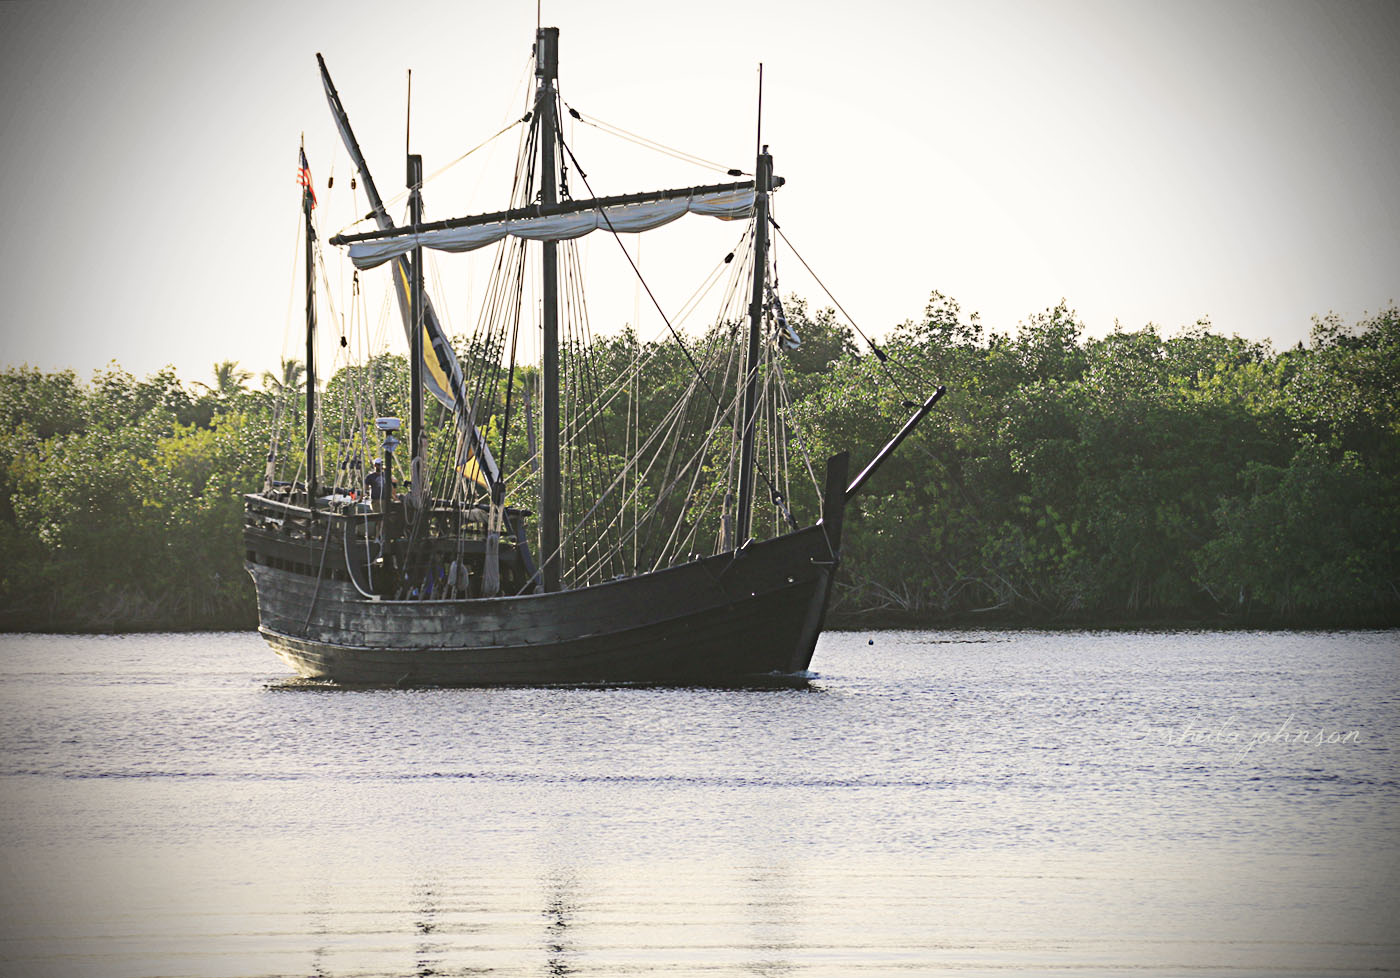 How Surprised Would You Be To Walk Onto A Dock In Florida And See A Replica Of Columbus' Nina Floating By? That's Exactly What Happened! If True To History, The Nina Is Much Smaller Than I Had Imagined -- Maybe 50 Feet Or So.